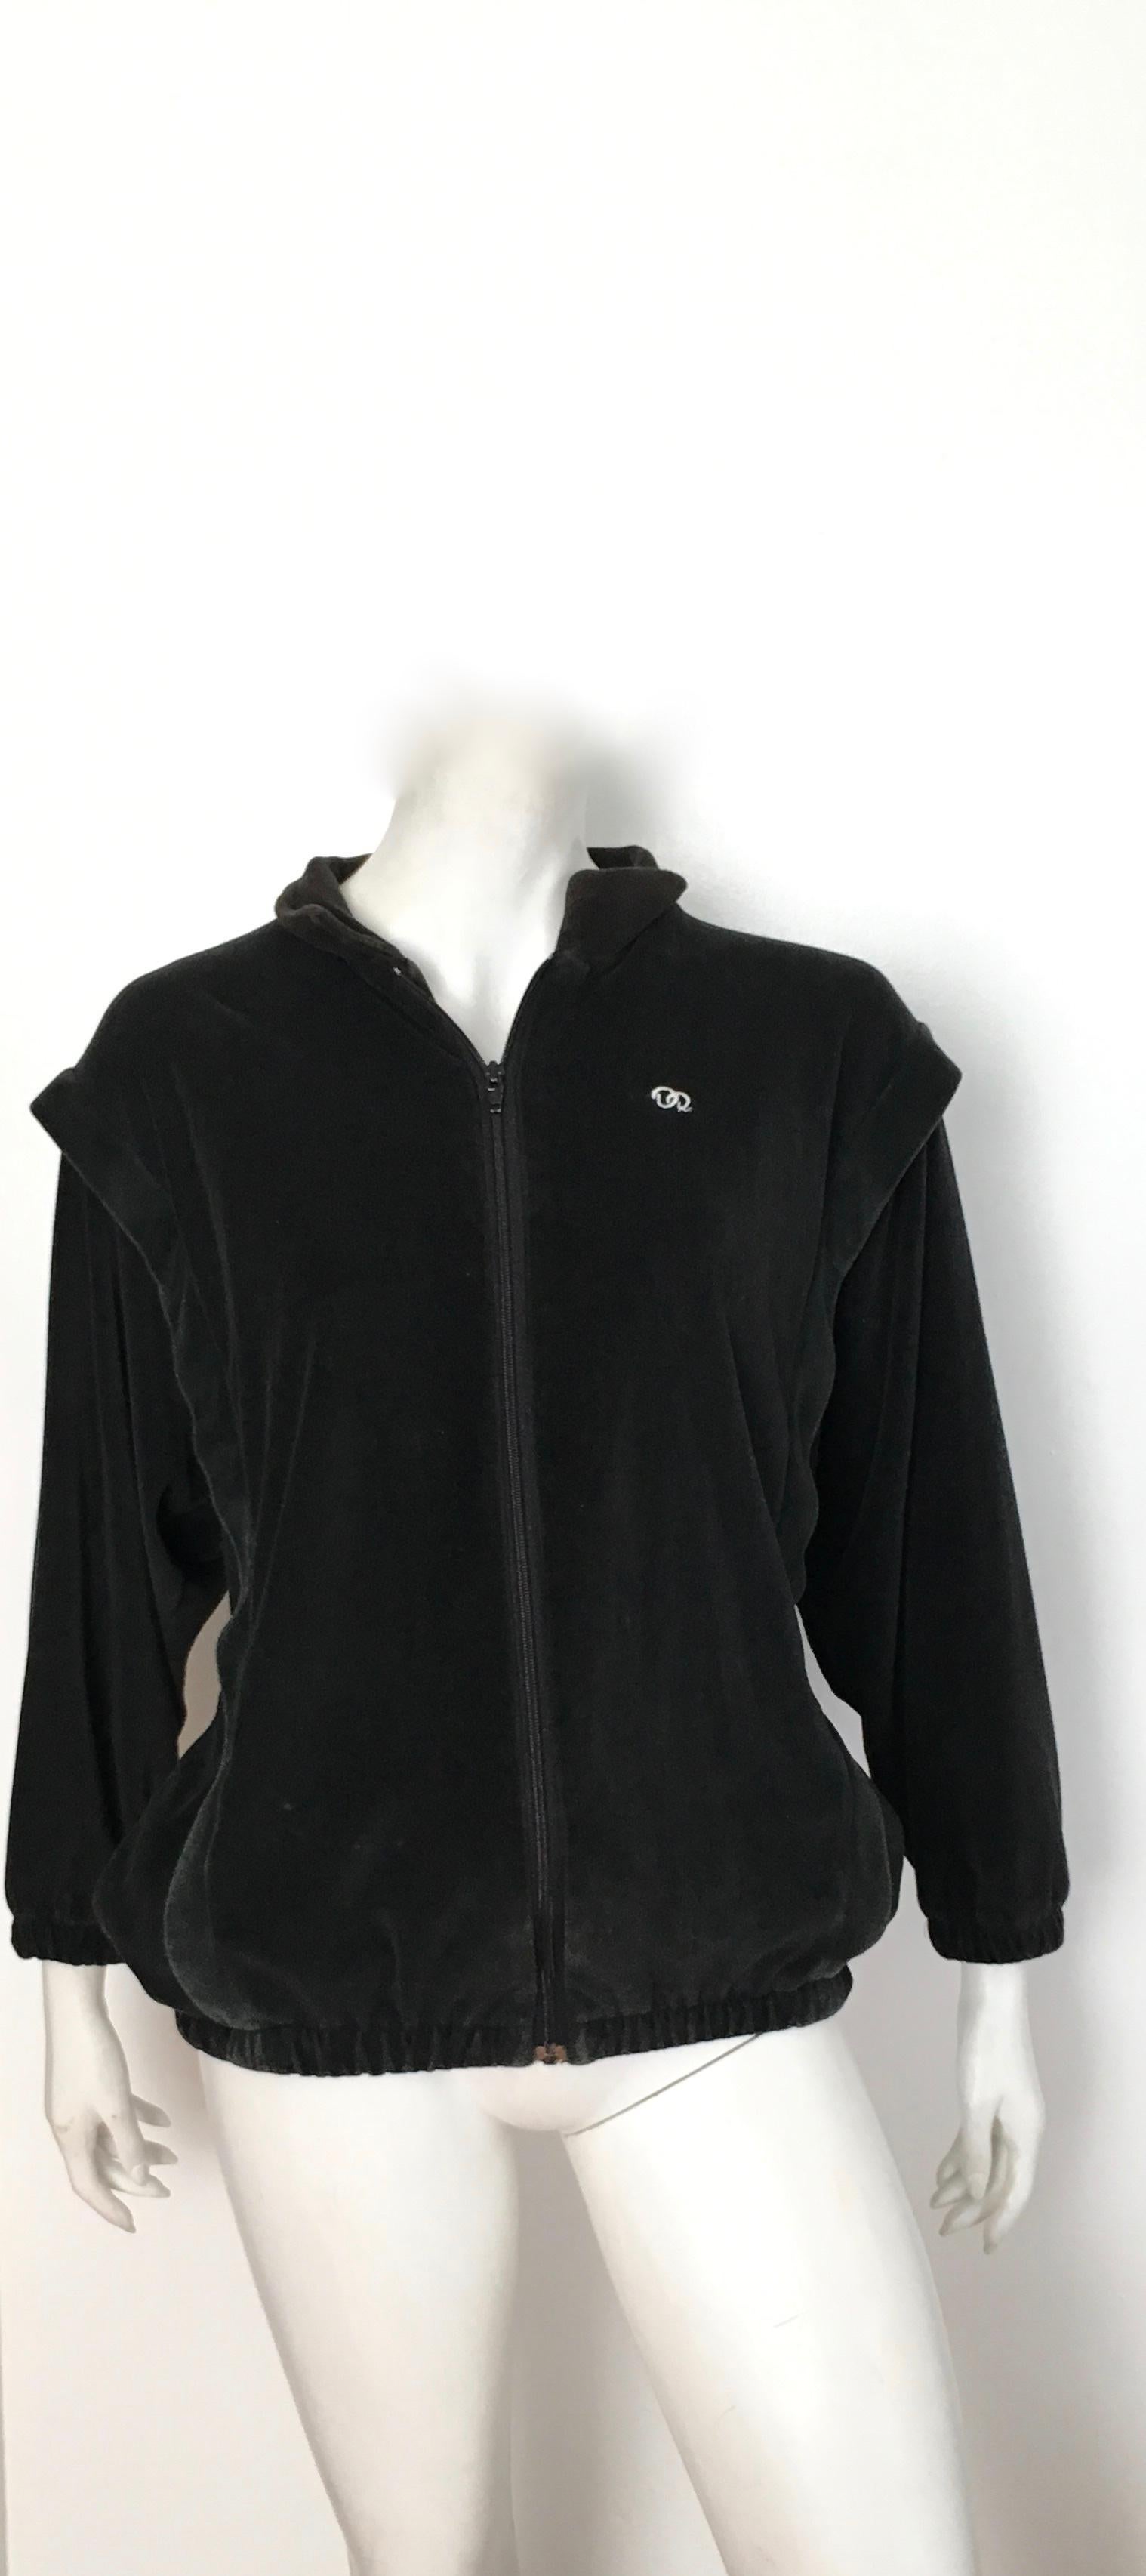 Oscar de la Renta Active 1980s black velour zipper activewear jacket with pockets is a size medium.  Matilda the Mannequin is wearing this activewear jacket and Matilda is a size 4.  In my opinion this will fit a size 4, 6 & 8 but you be the judge. 